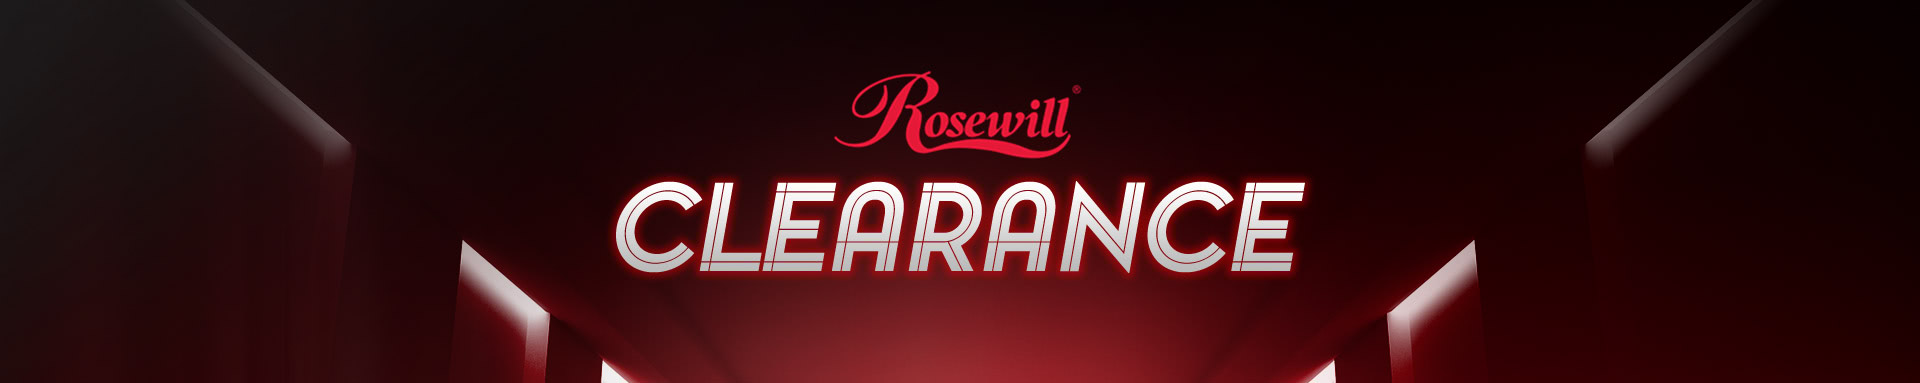 Rosewill Clearance